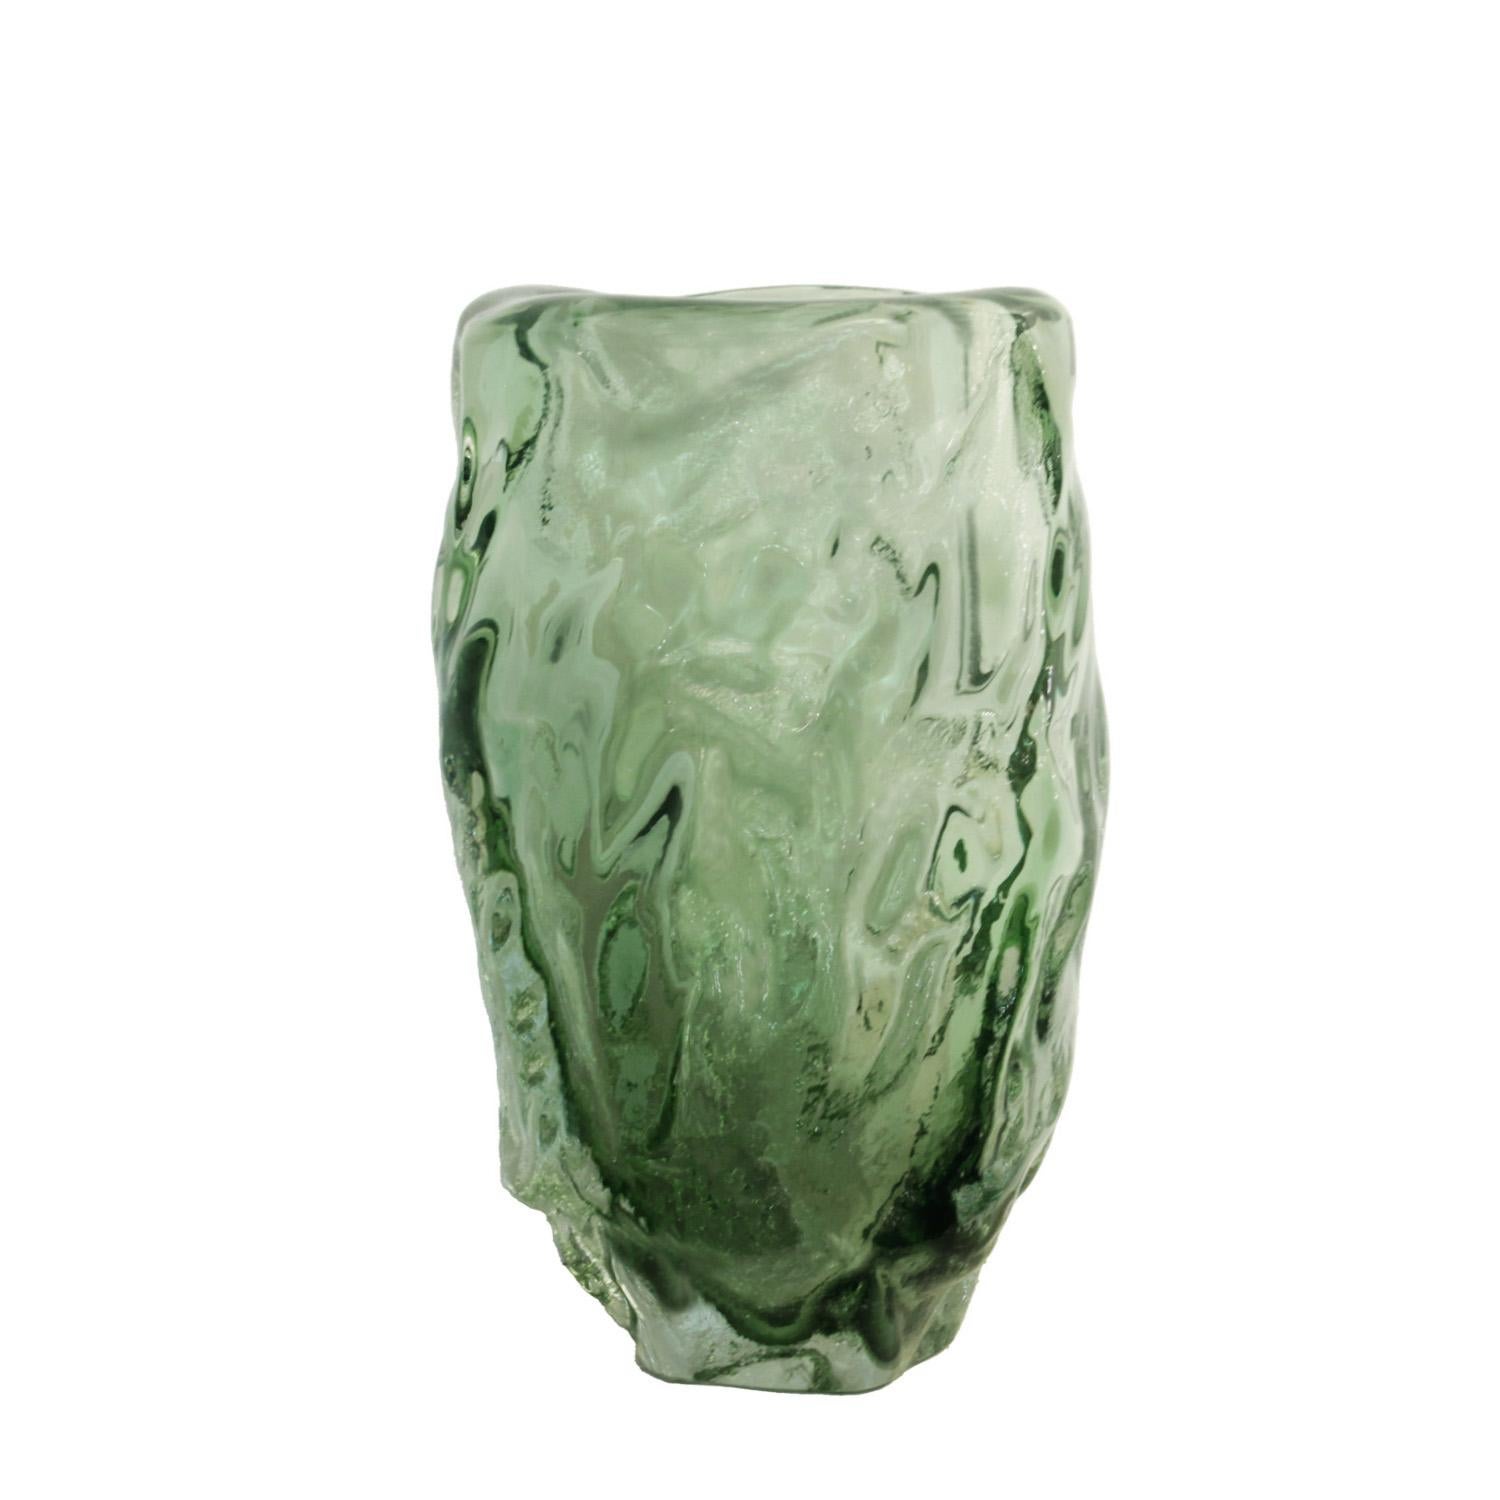 Hand crafted Murano sommerso green glass vase inspired by the works of Italian abstract artist Alberto Burri.  Italy 2023